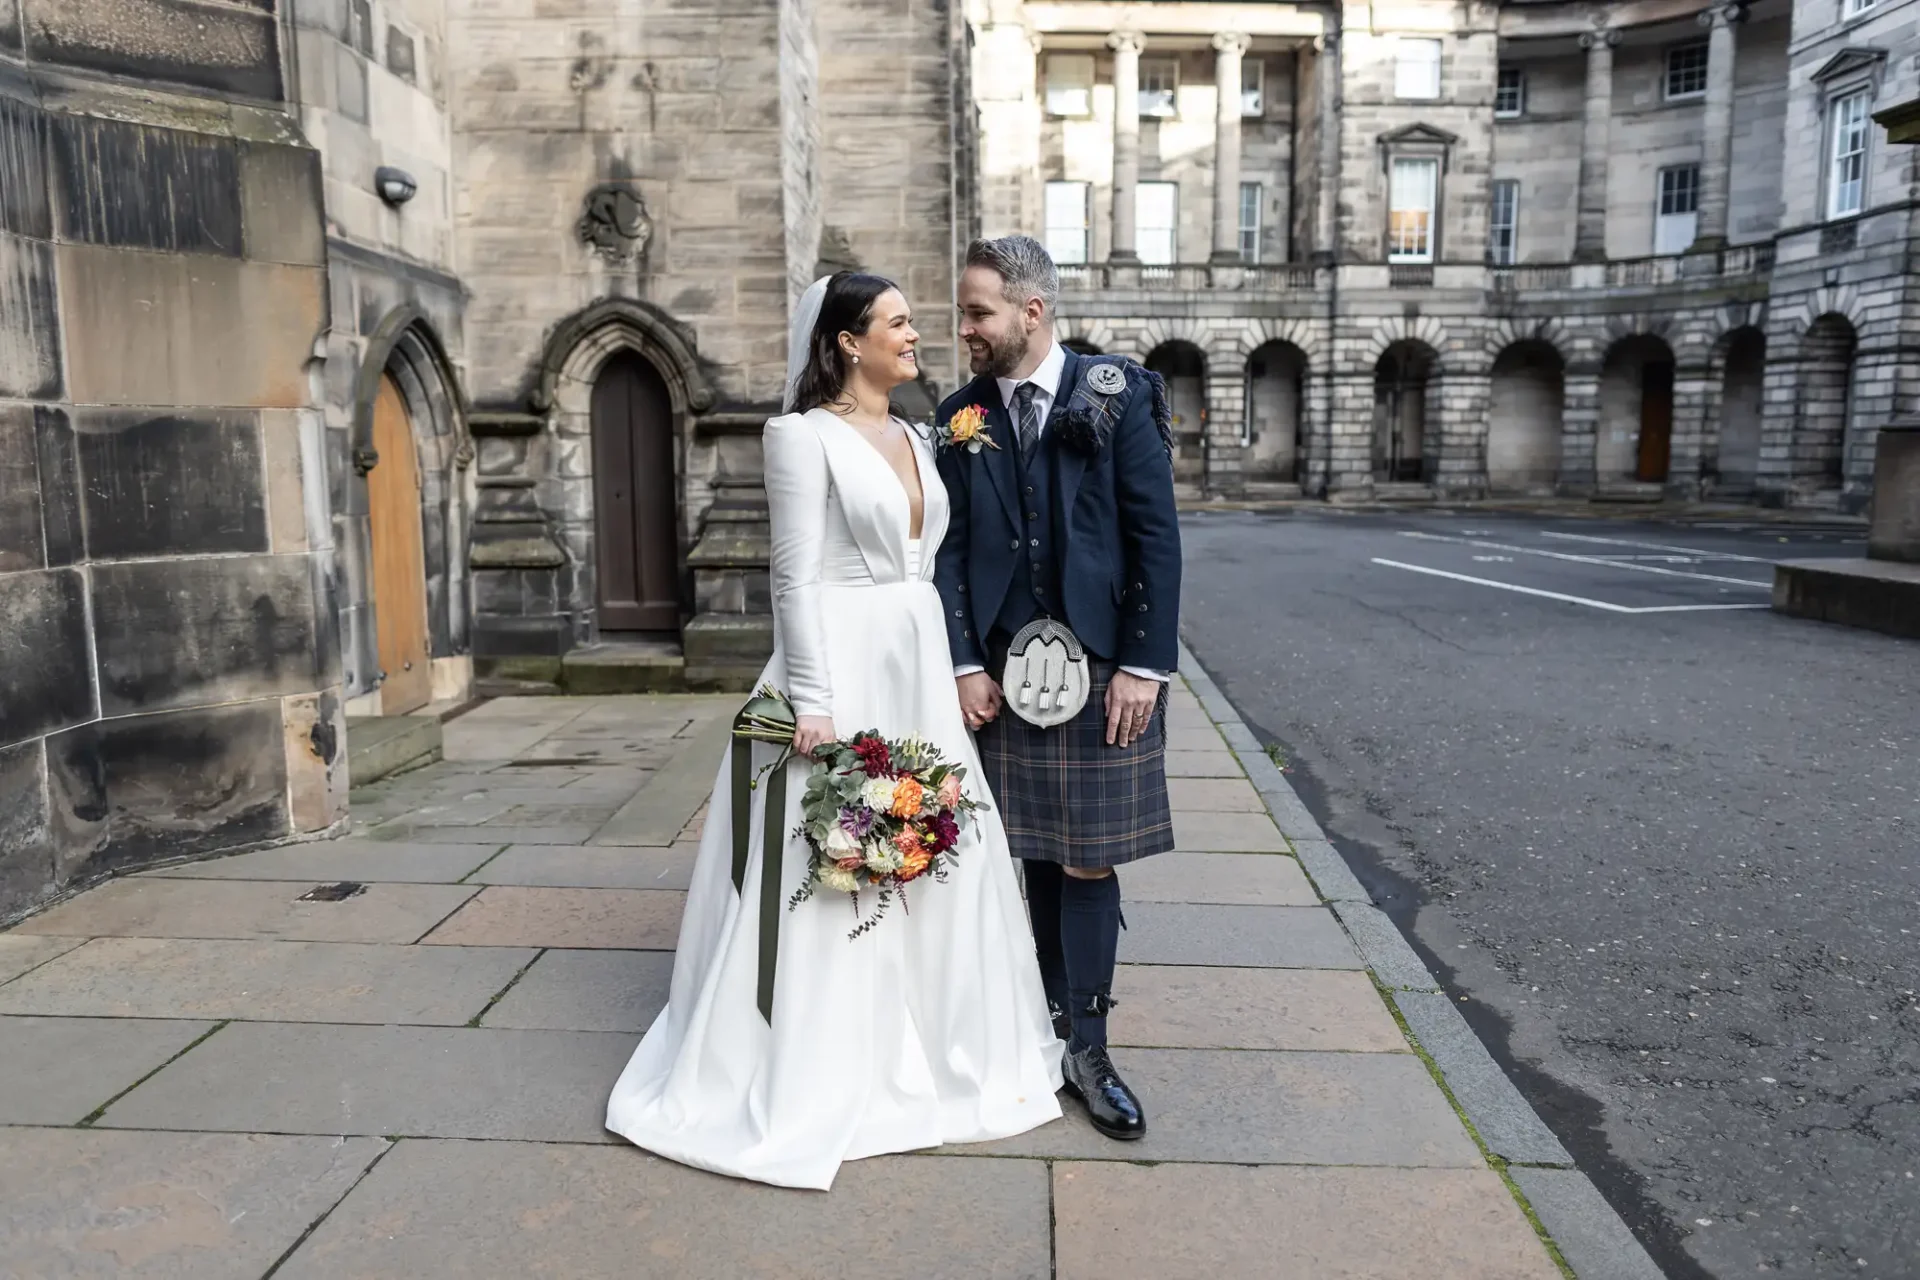 A bride in a white dress and a groom in a kilt smiling at each other, holding hands in a courtyard.